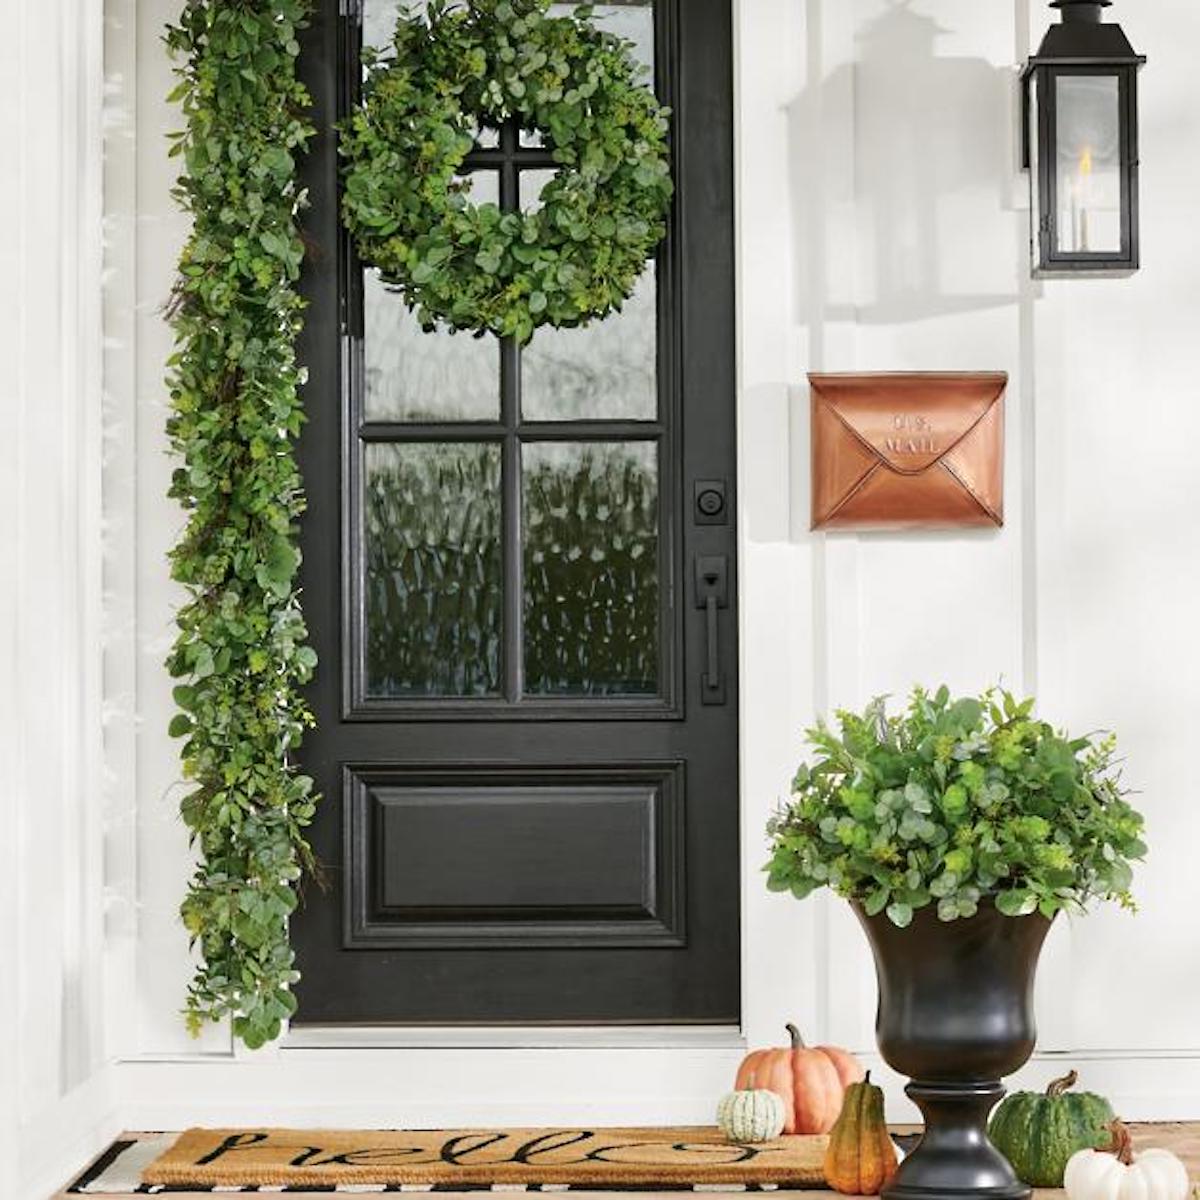 Fall Decorating Ideas: 17 Amazing Additions To Your Seasonal Home Decor You’ll Love